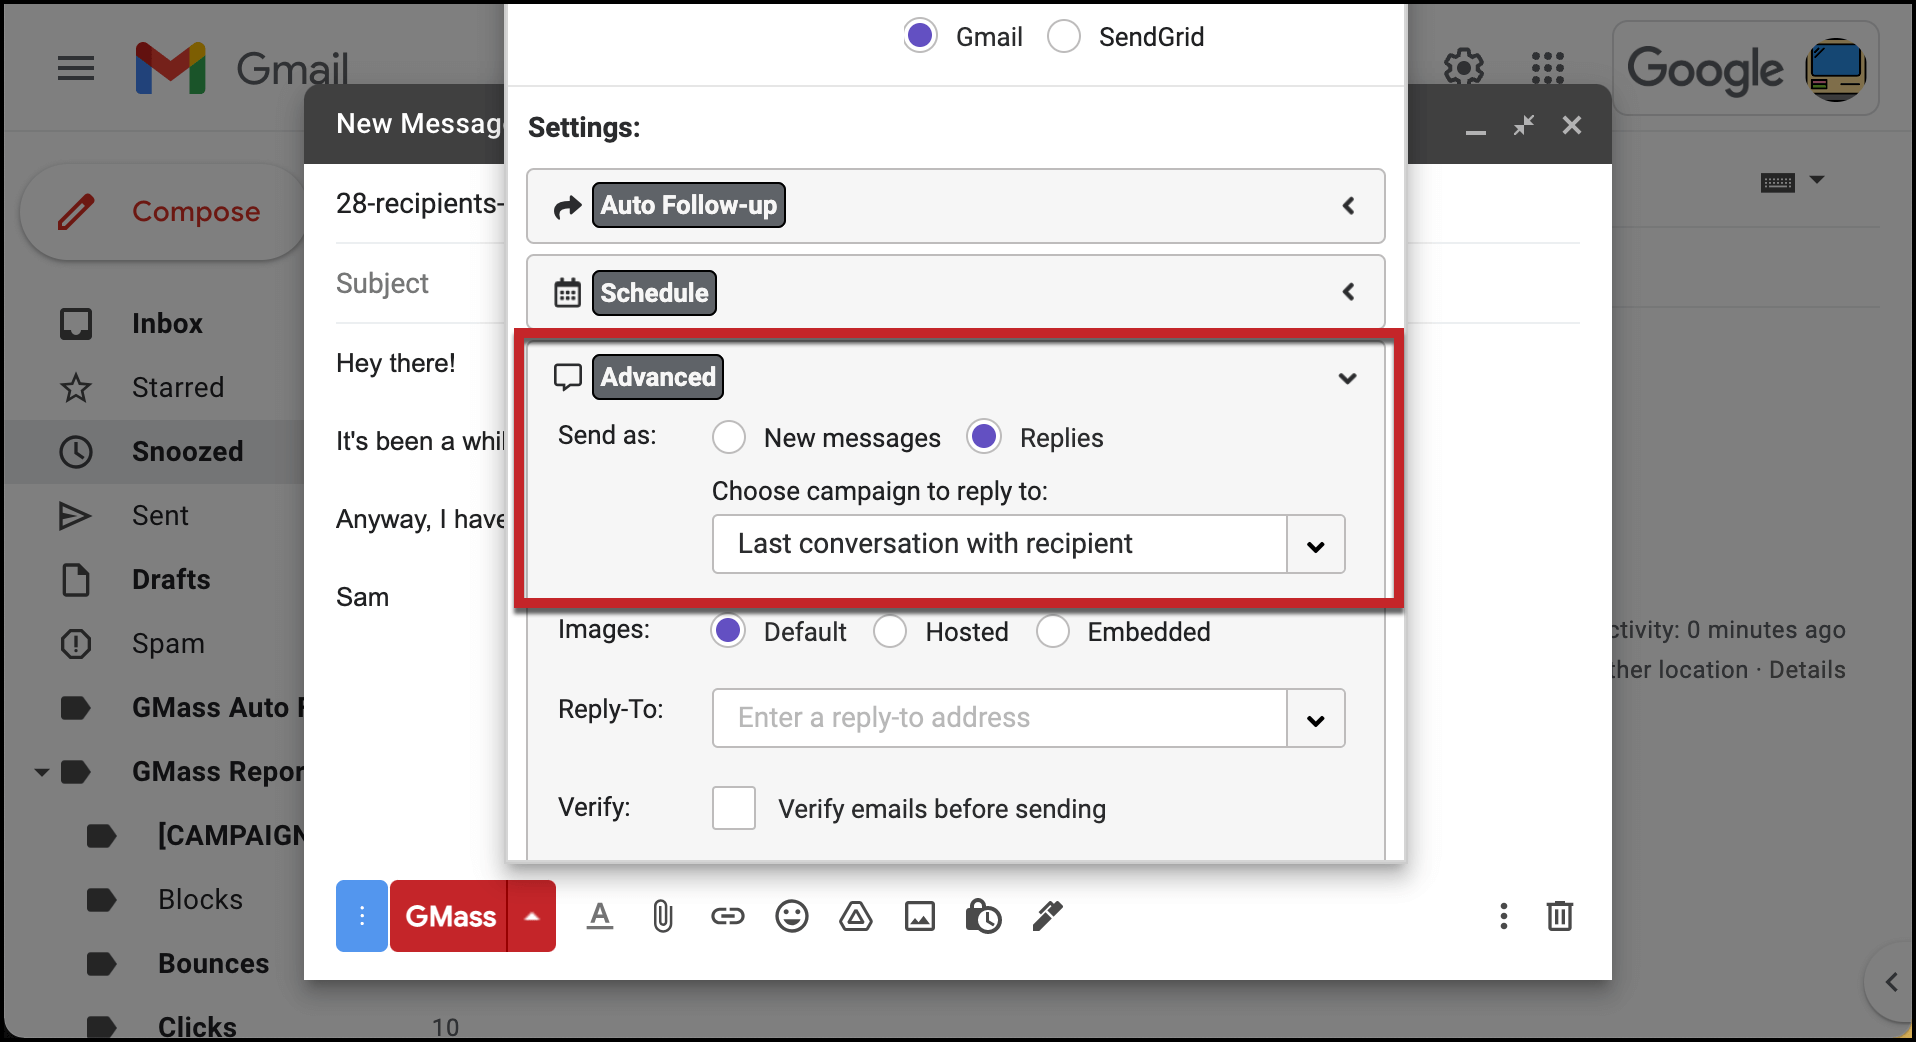 How to set up send as replies for a campaign